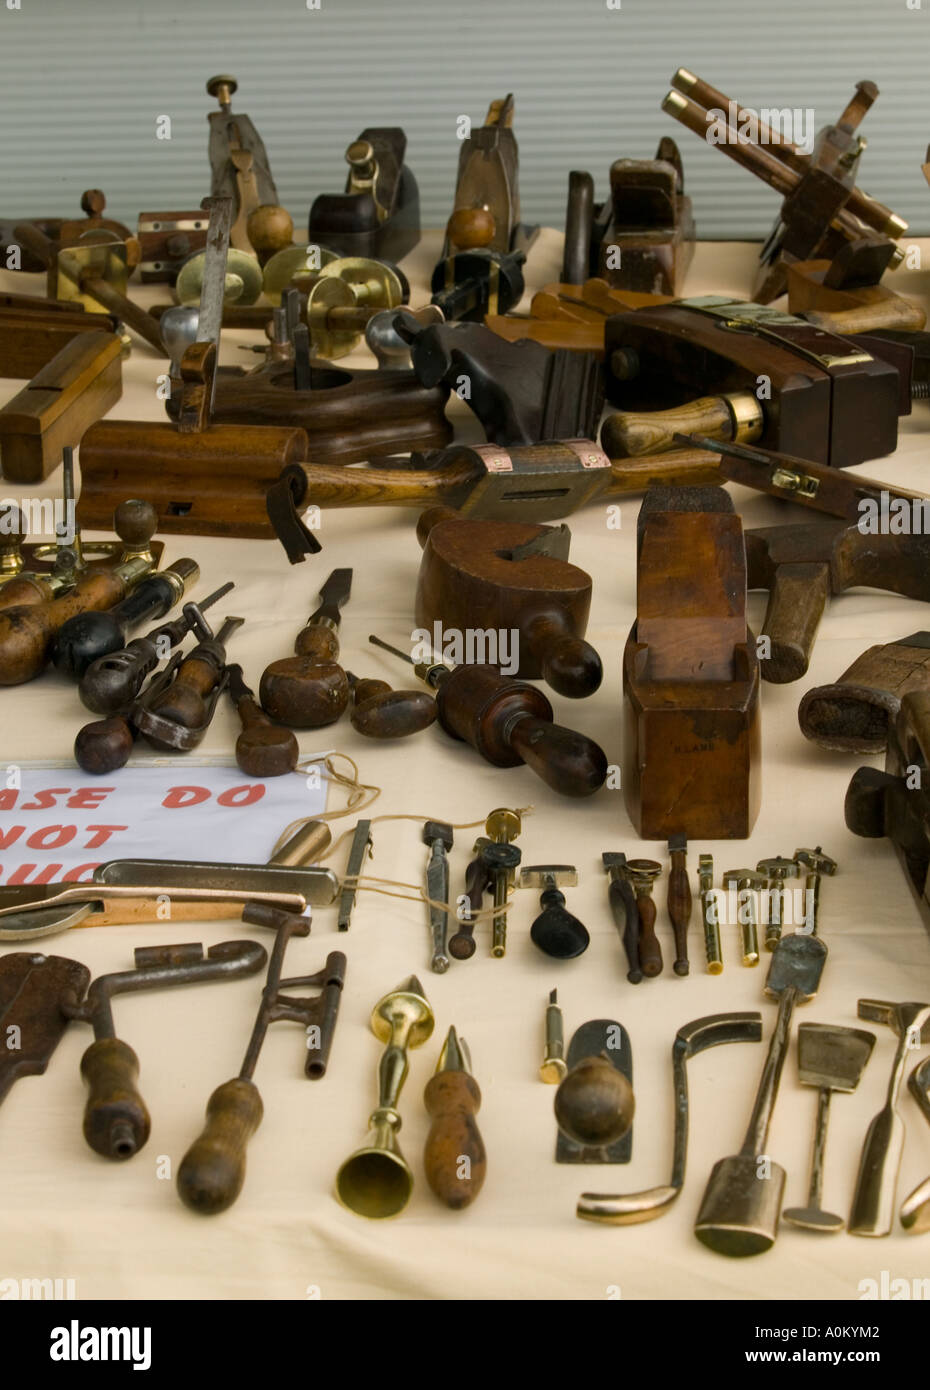 Engineering tools for steam engines Stock Photo